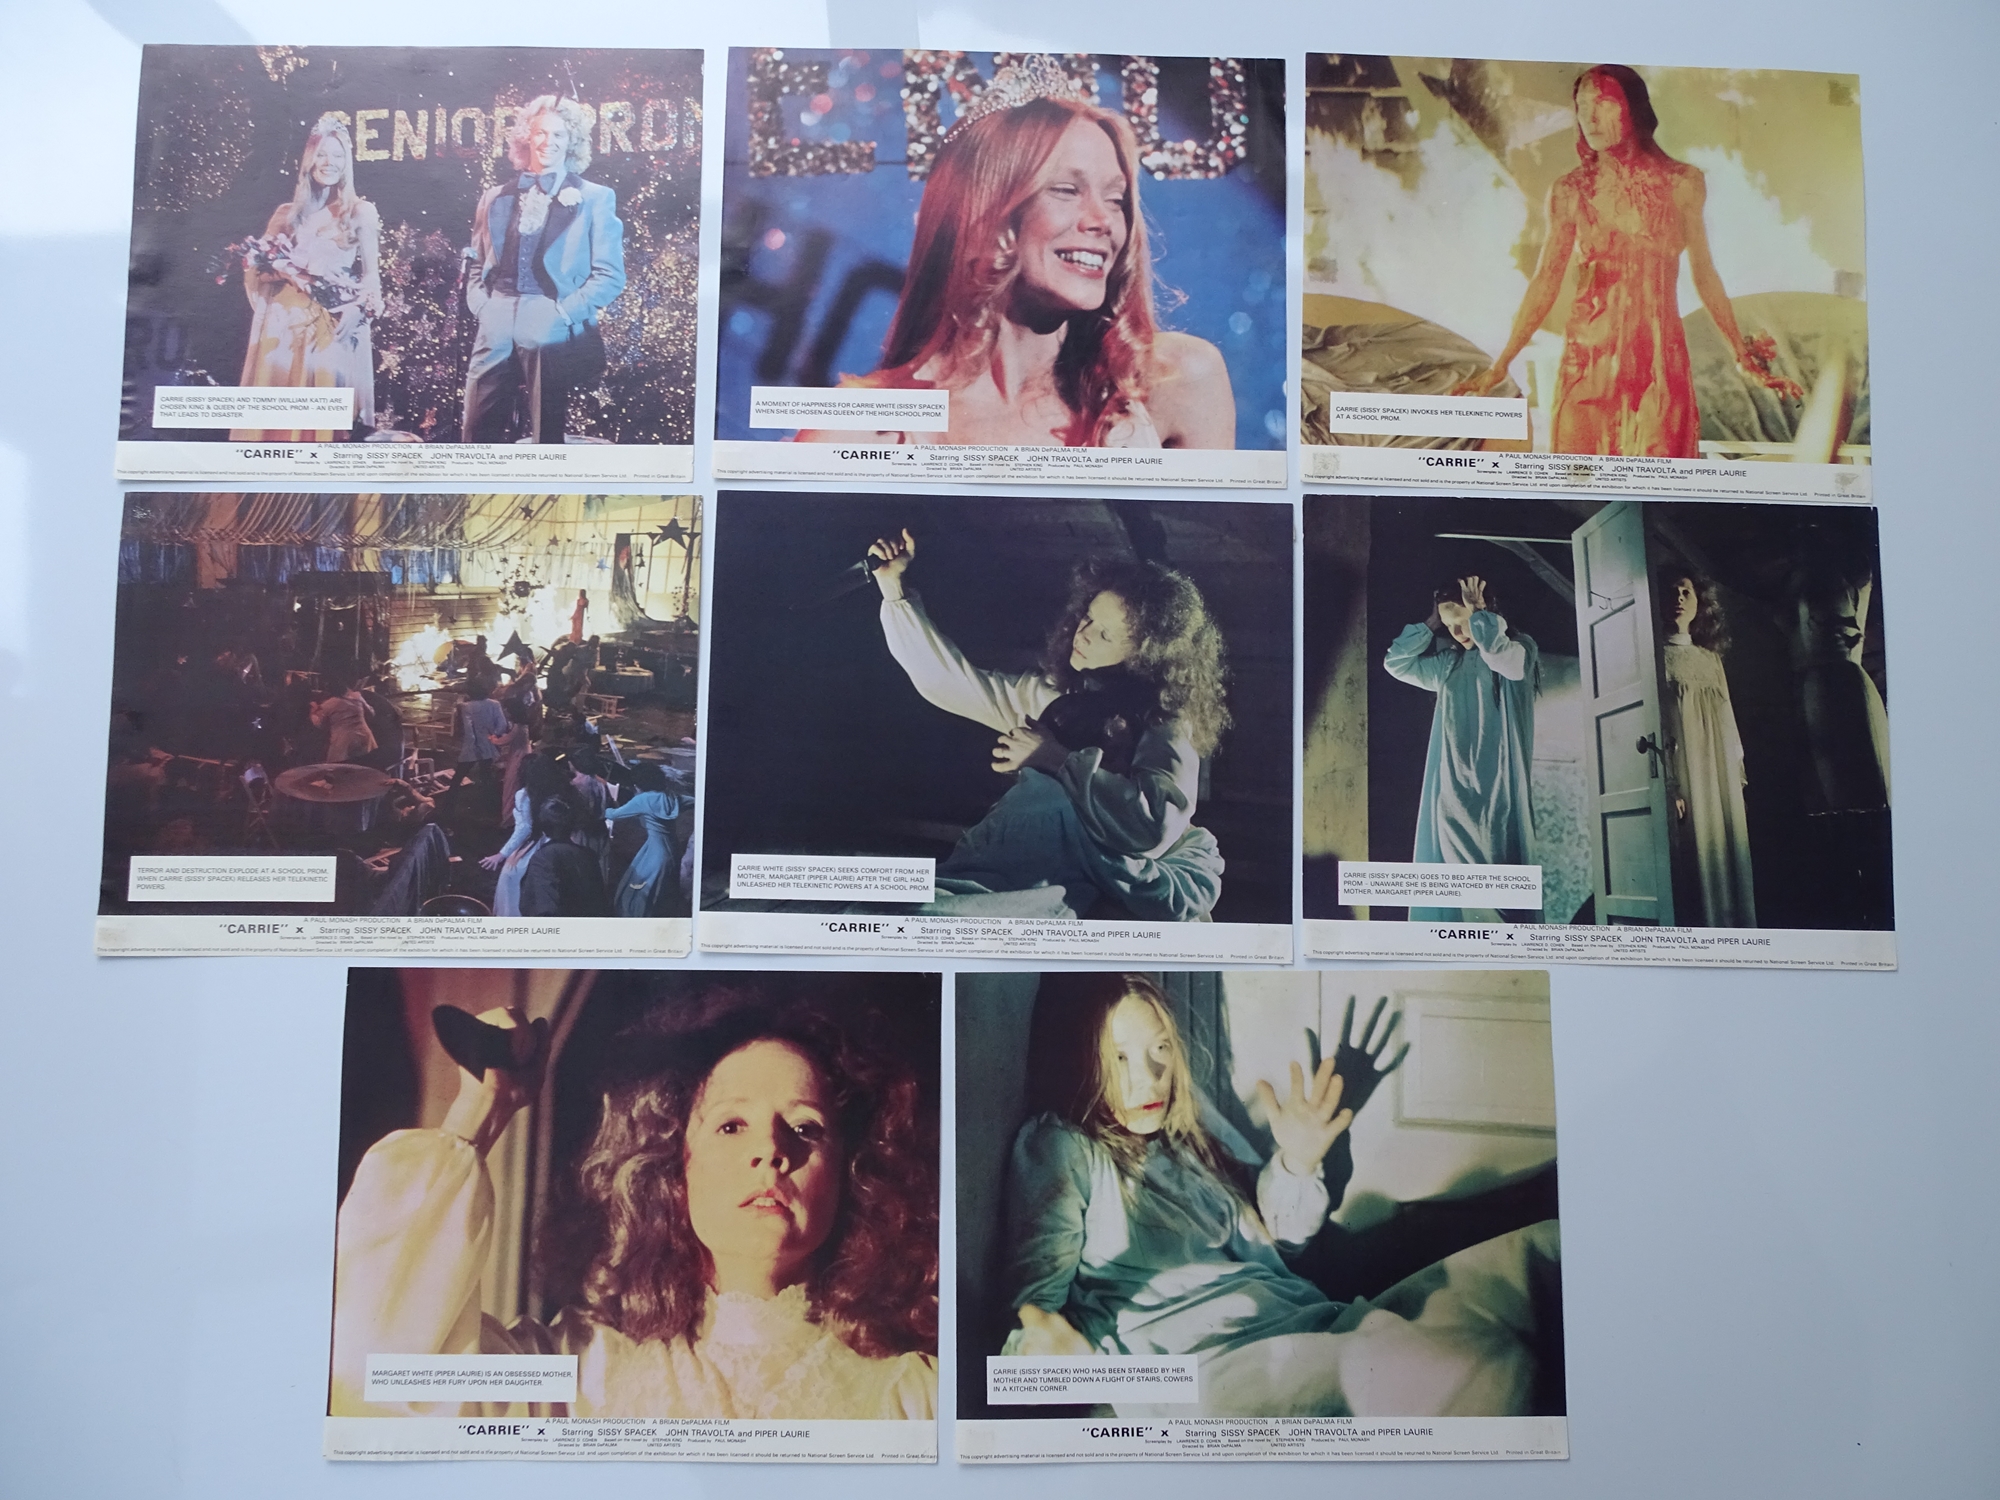 CARRIE (1976) - UK Quad together with a UK Front of House Set and a US One Sheet Movie Poster (3) - Image 3 of 3